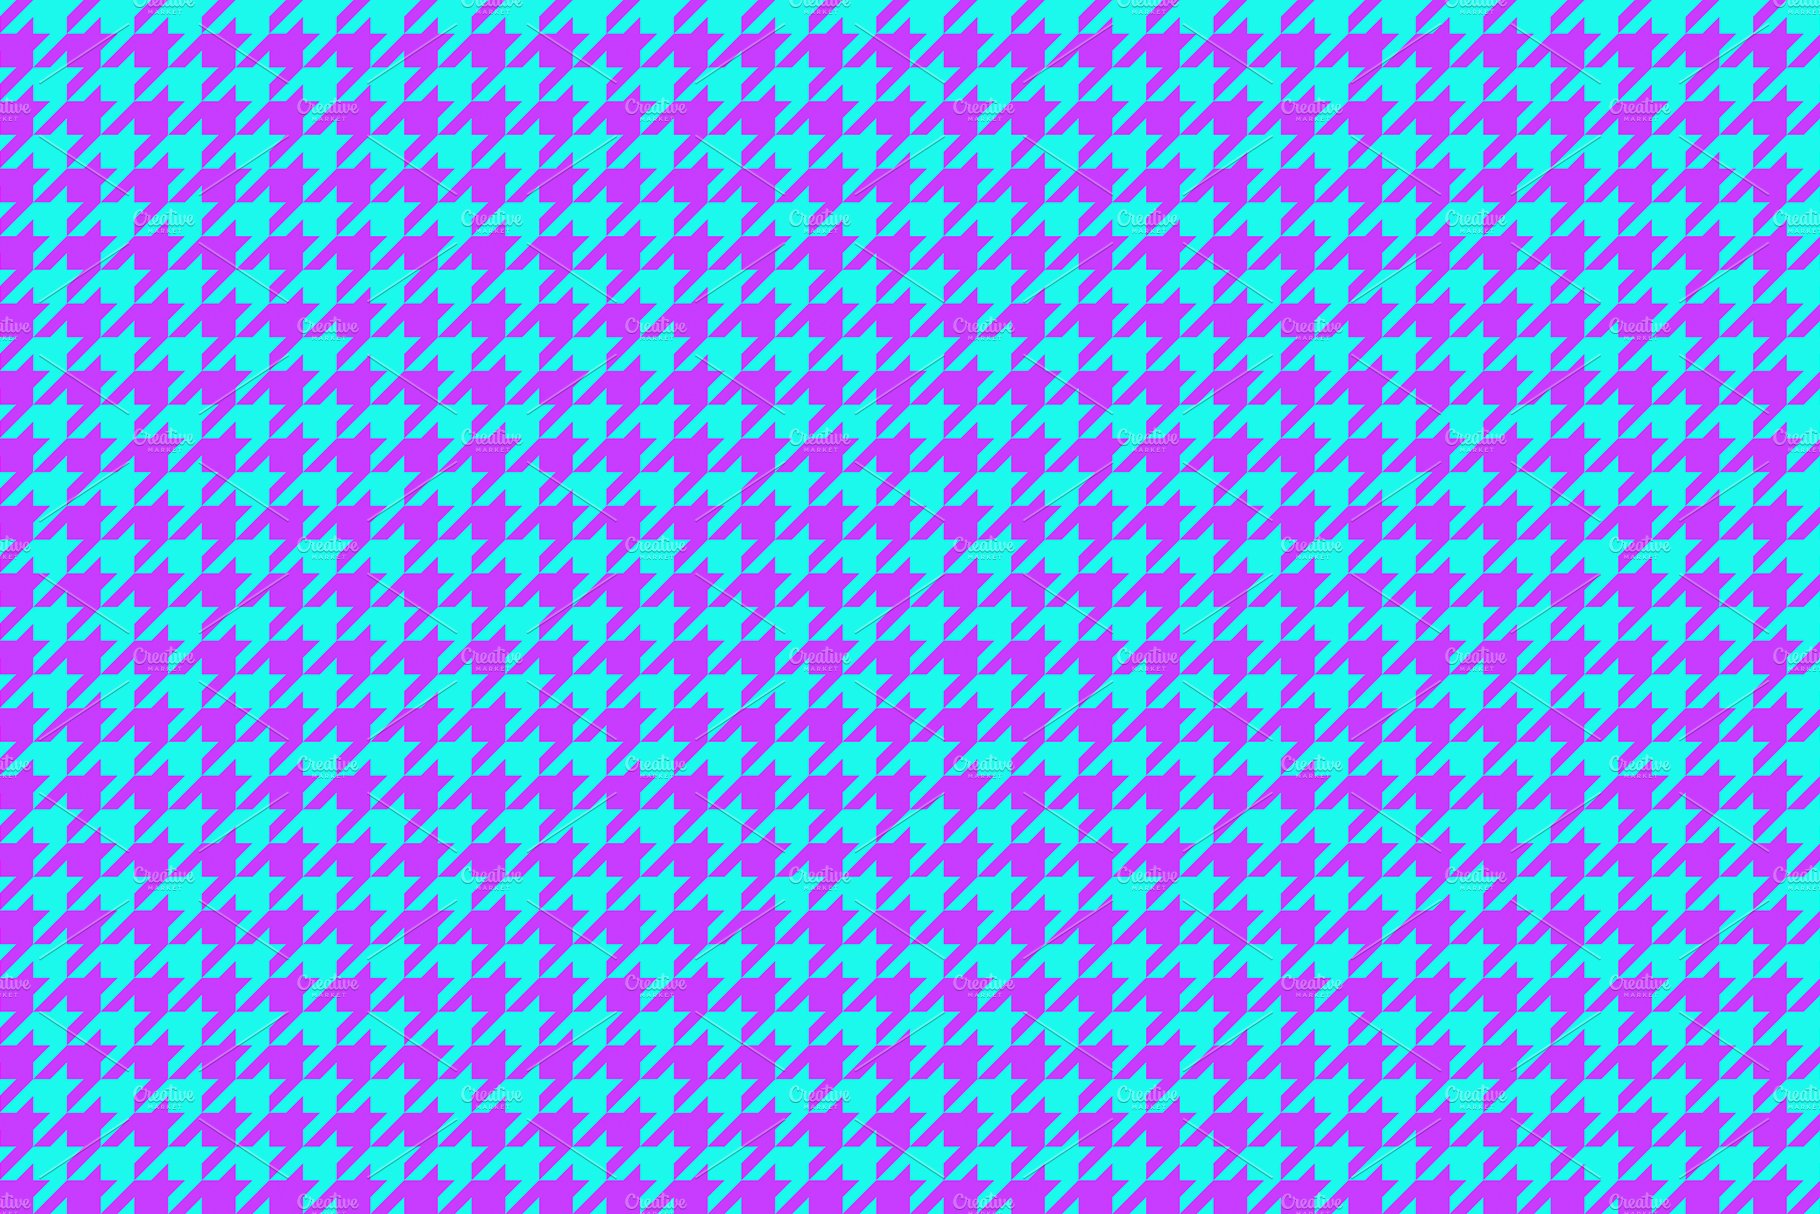 13 houndstooth pattern background texture copy 767